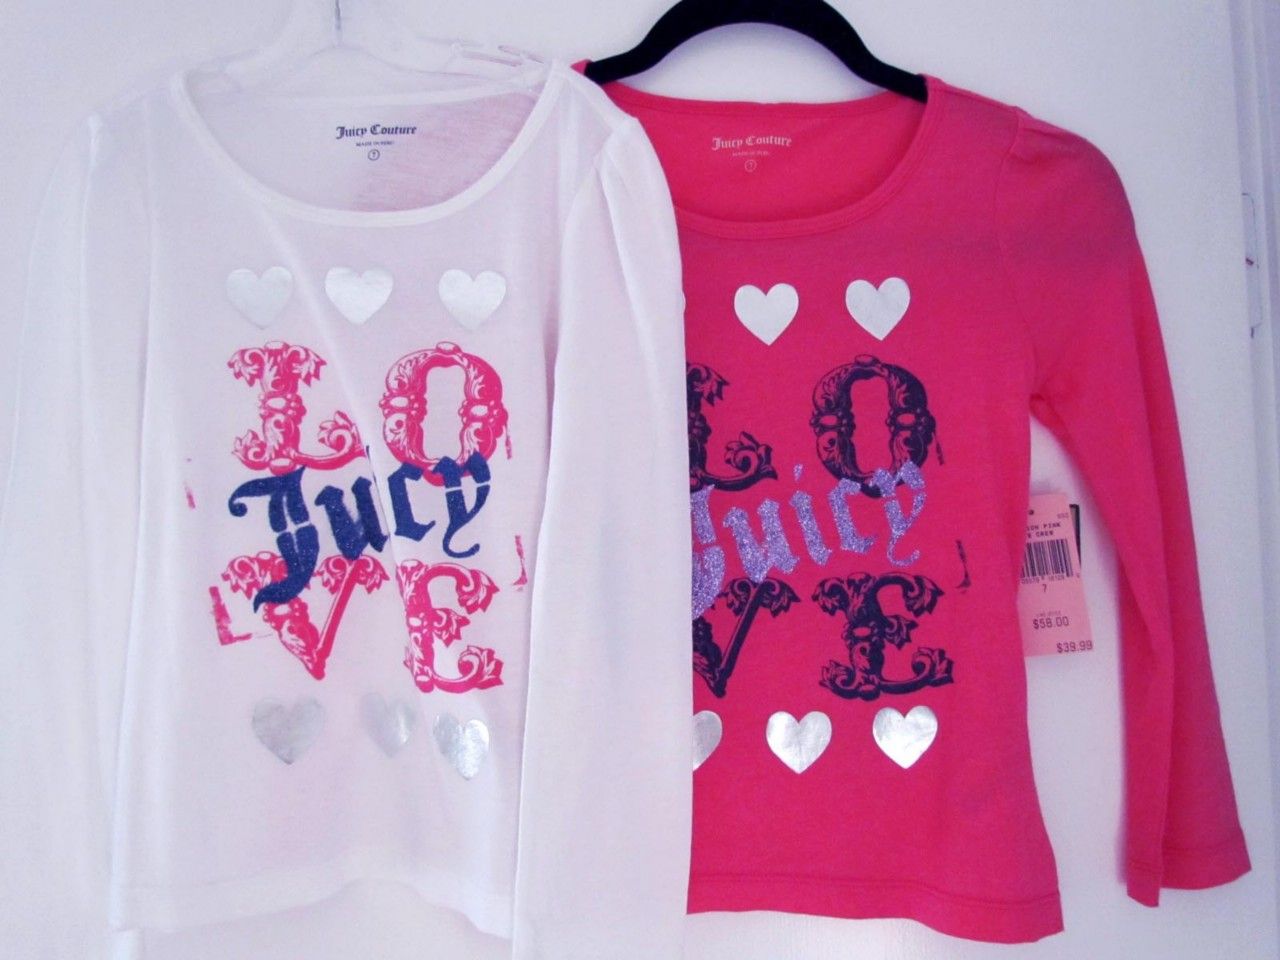 Juicy Couture Kids Love Juicy Glitter Silver Hearts T Shirt Top 7 10